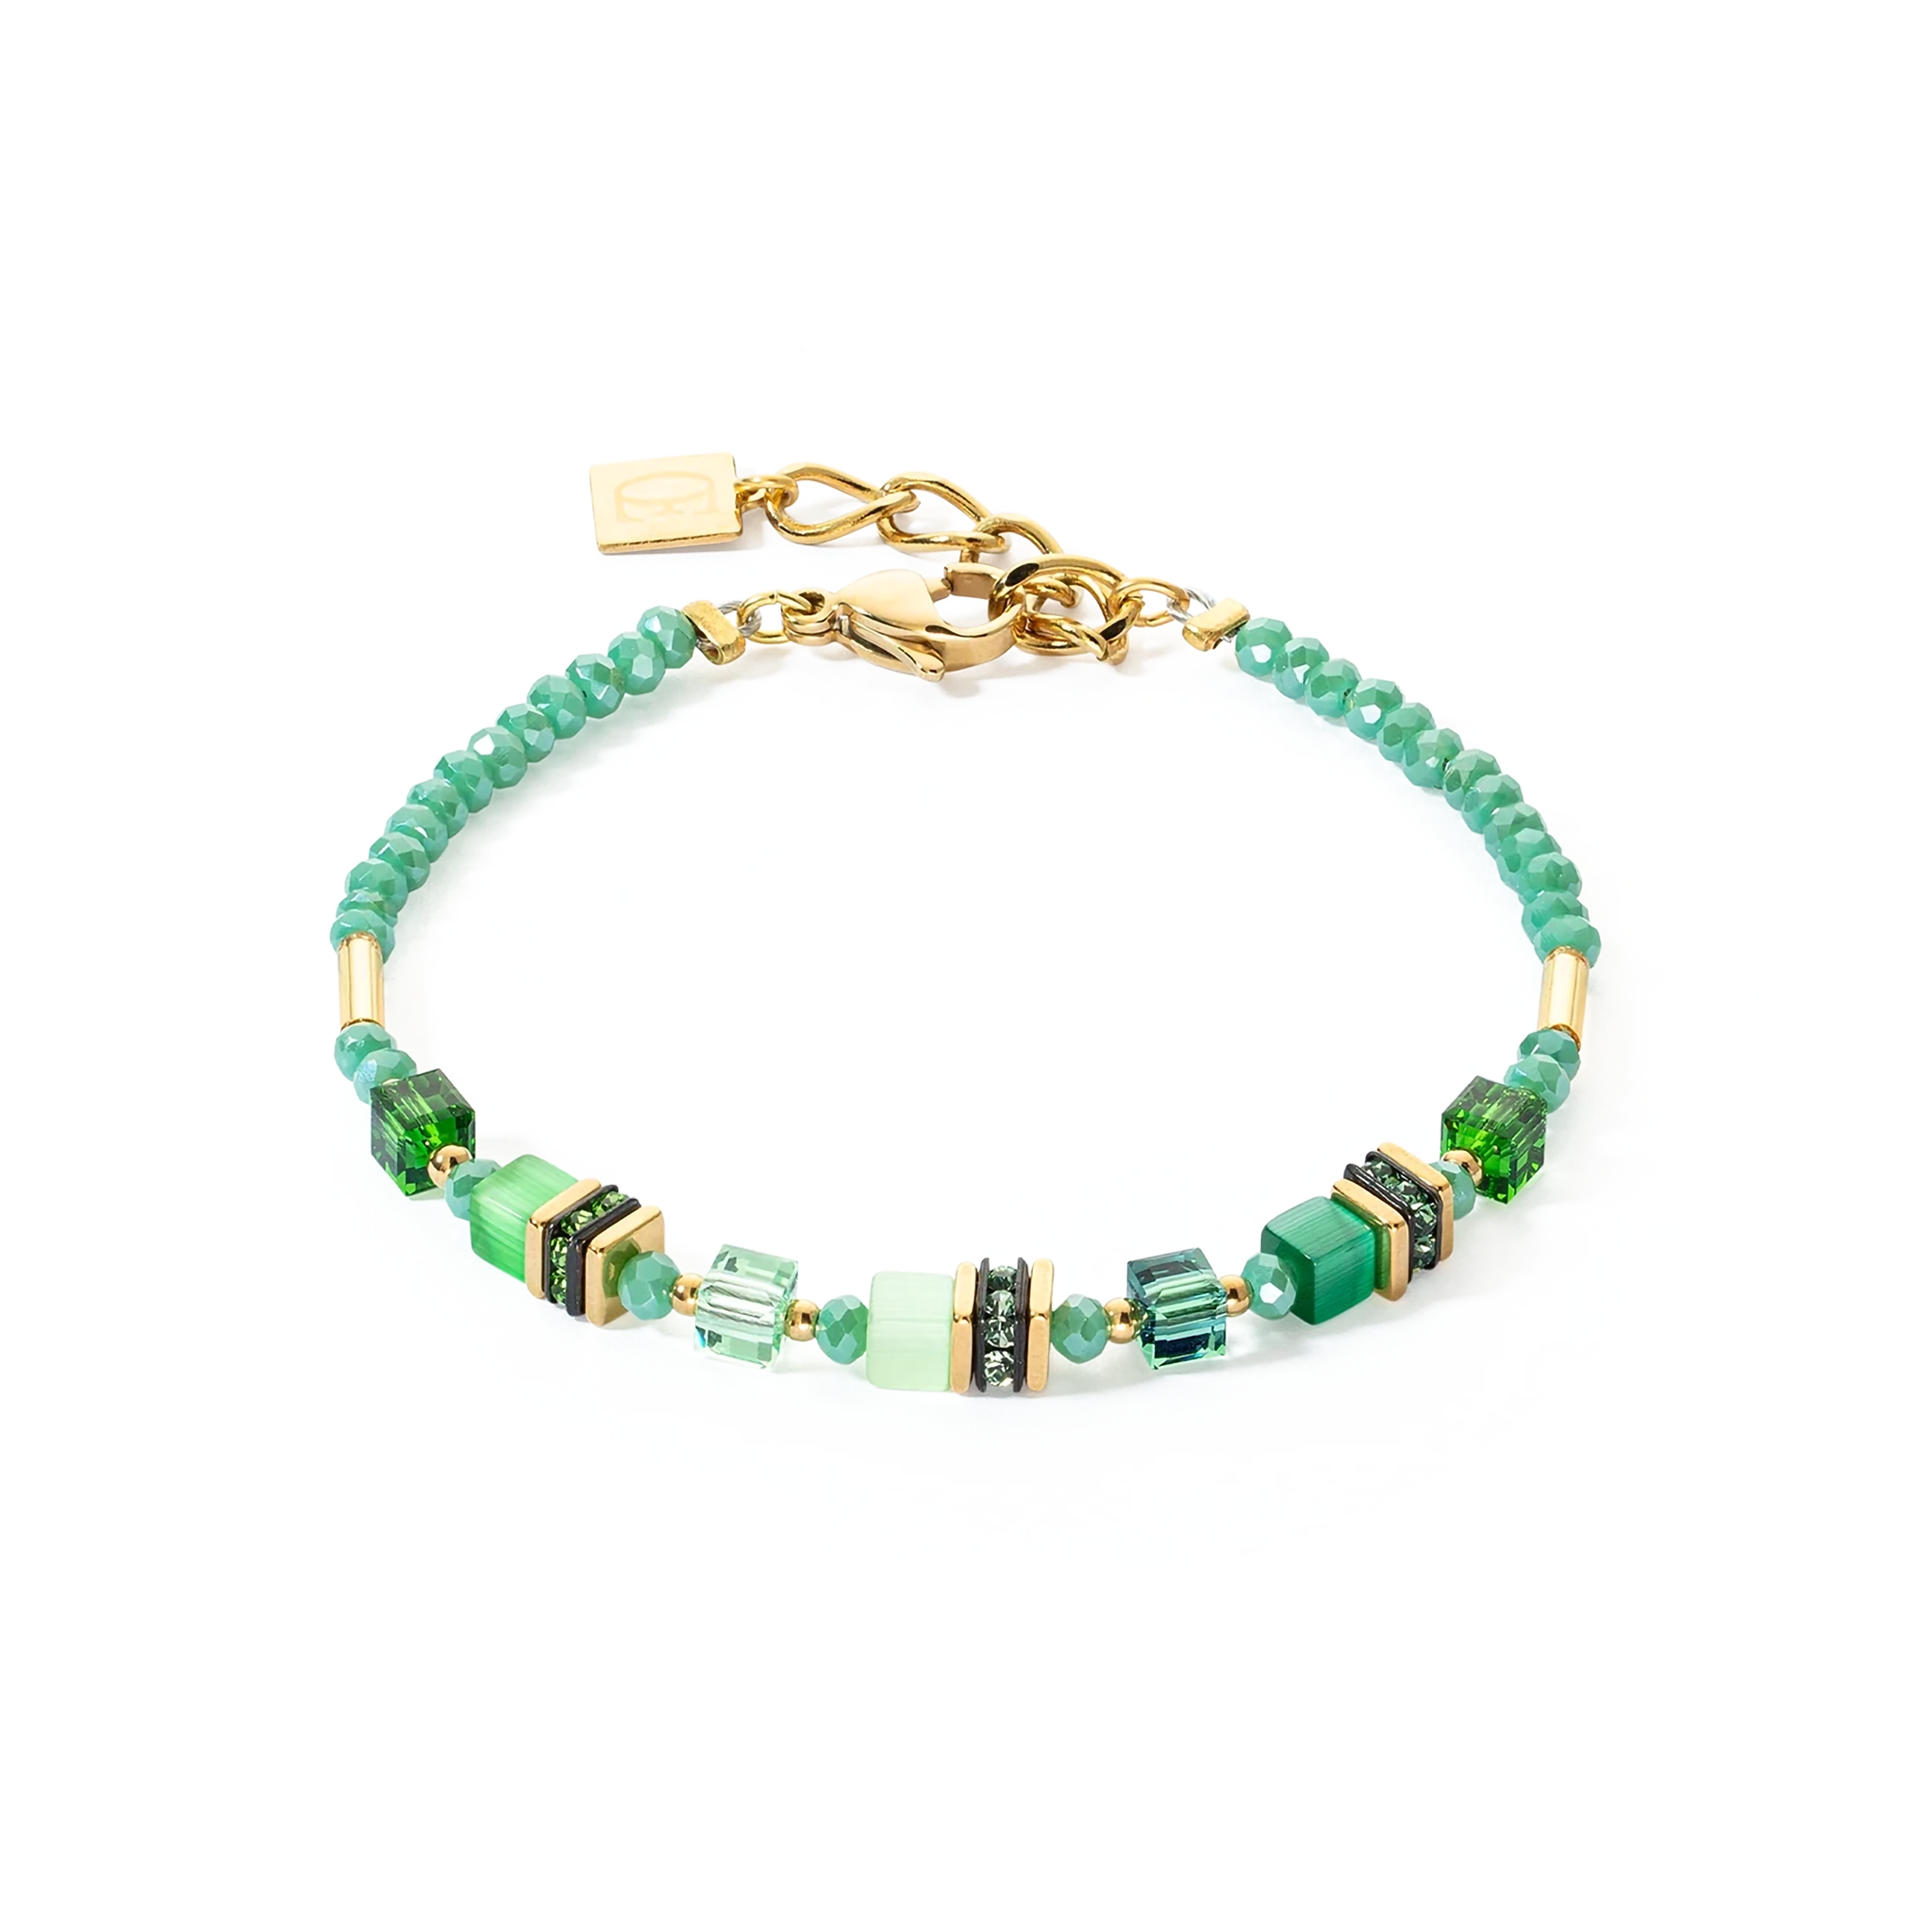 A gold bracelet with bright green stones